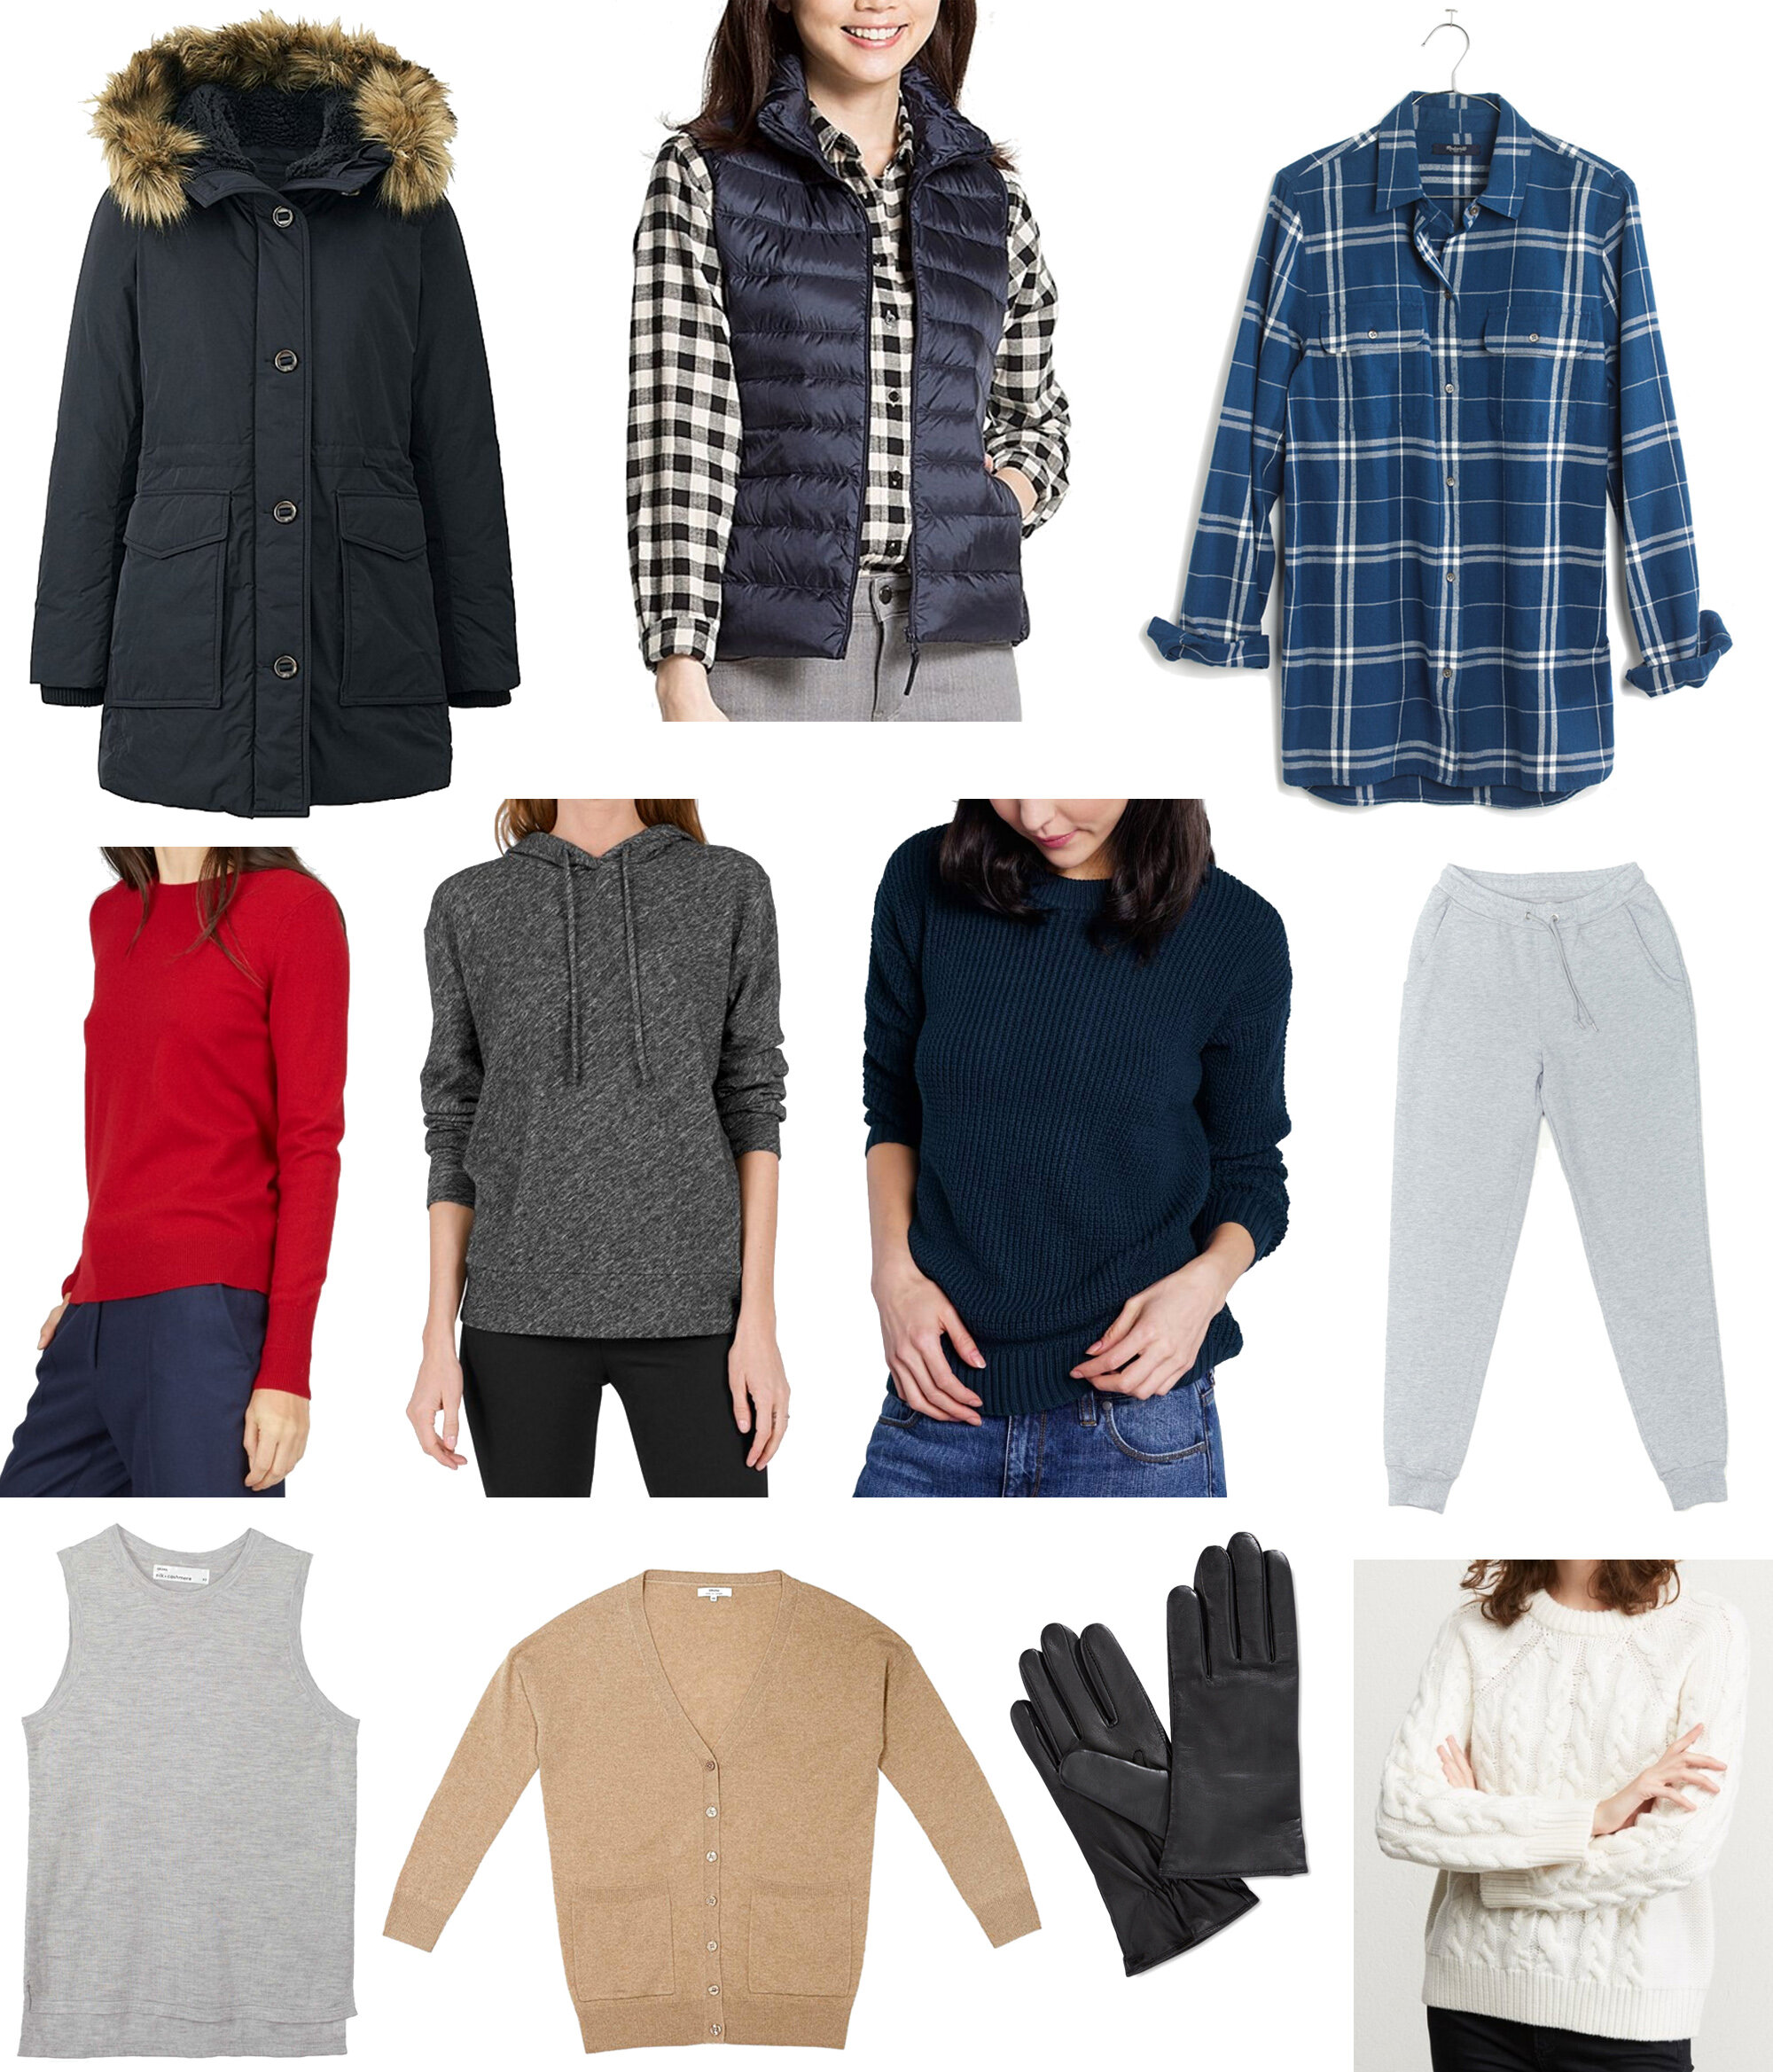 An analysis of past winter purchases: December 2016 — Cotton Cashmere Cat Hair